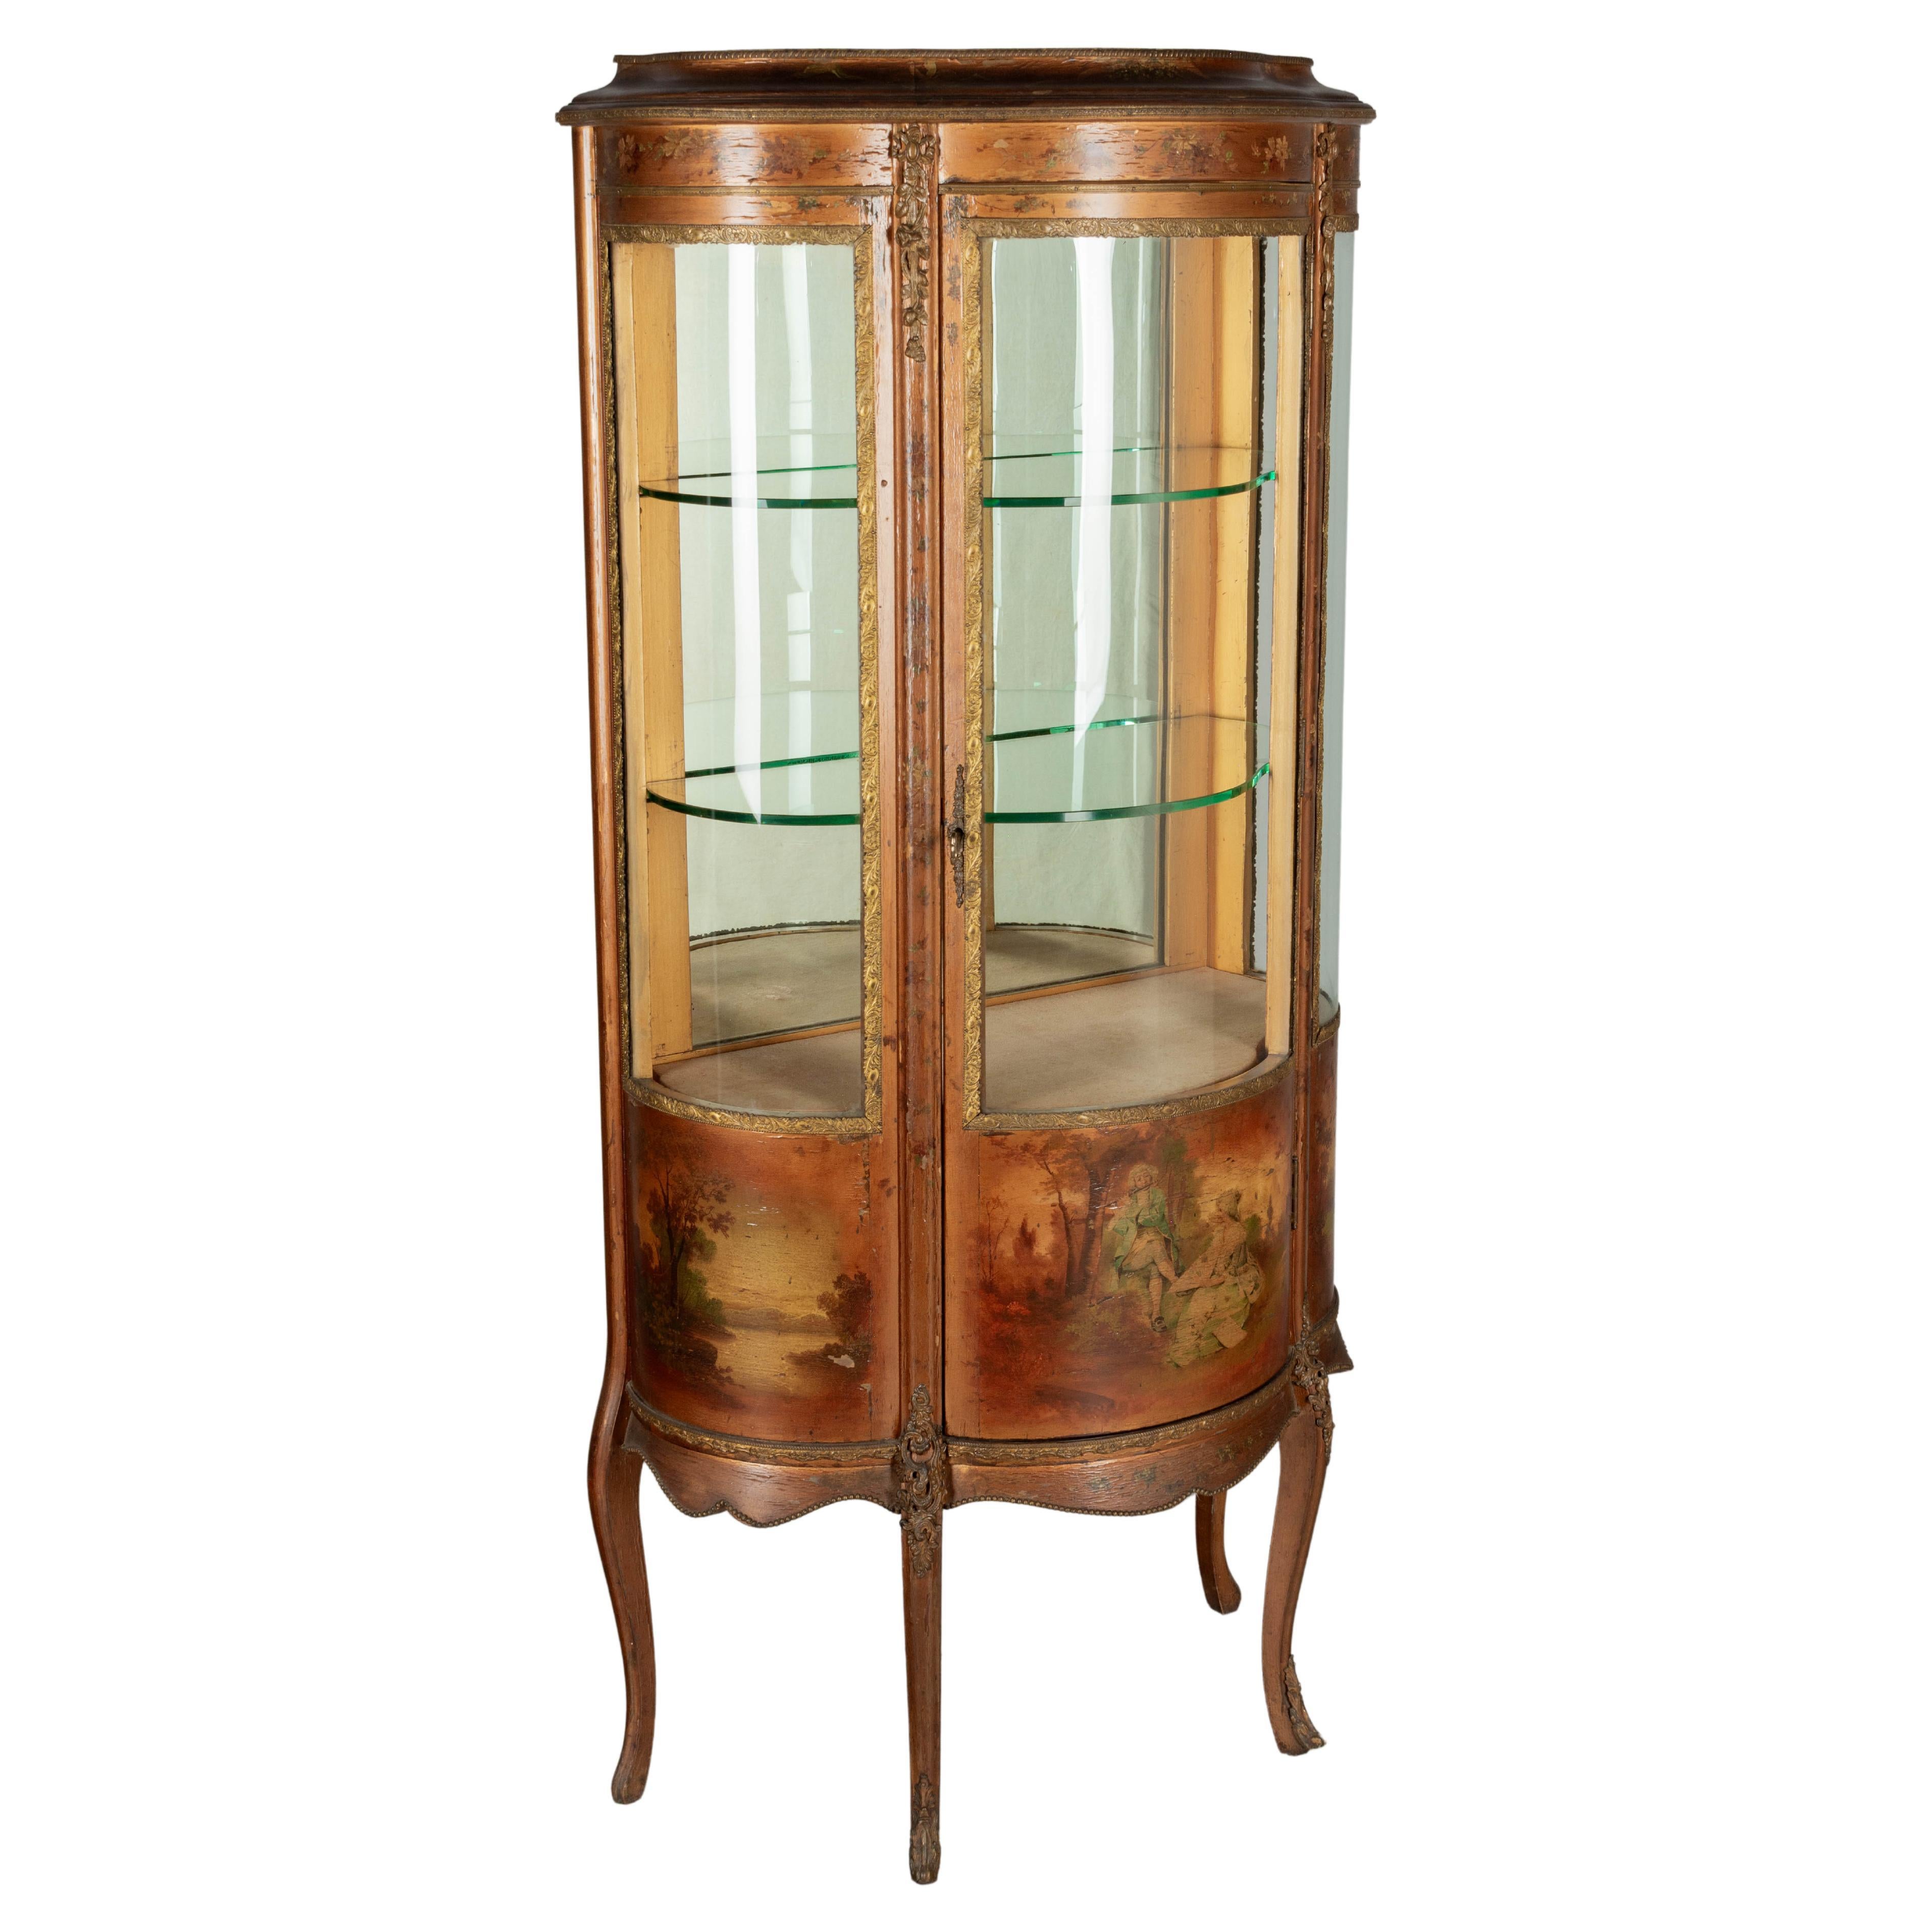 French Louis XVI Style Vernis Martin Decorated Giltwood Vitrine